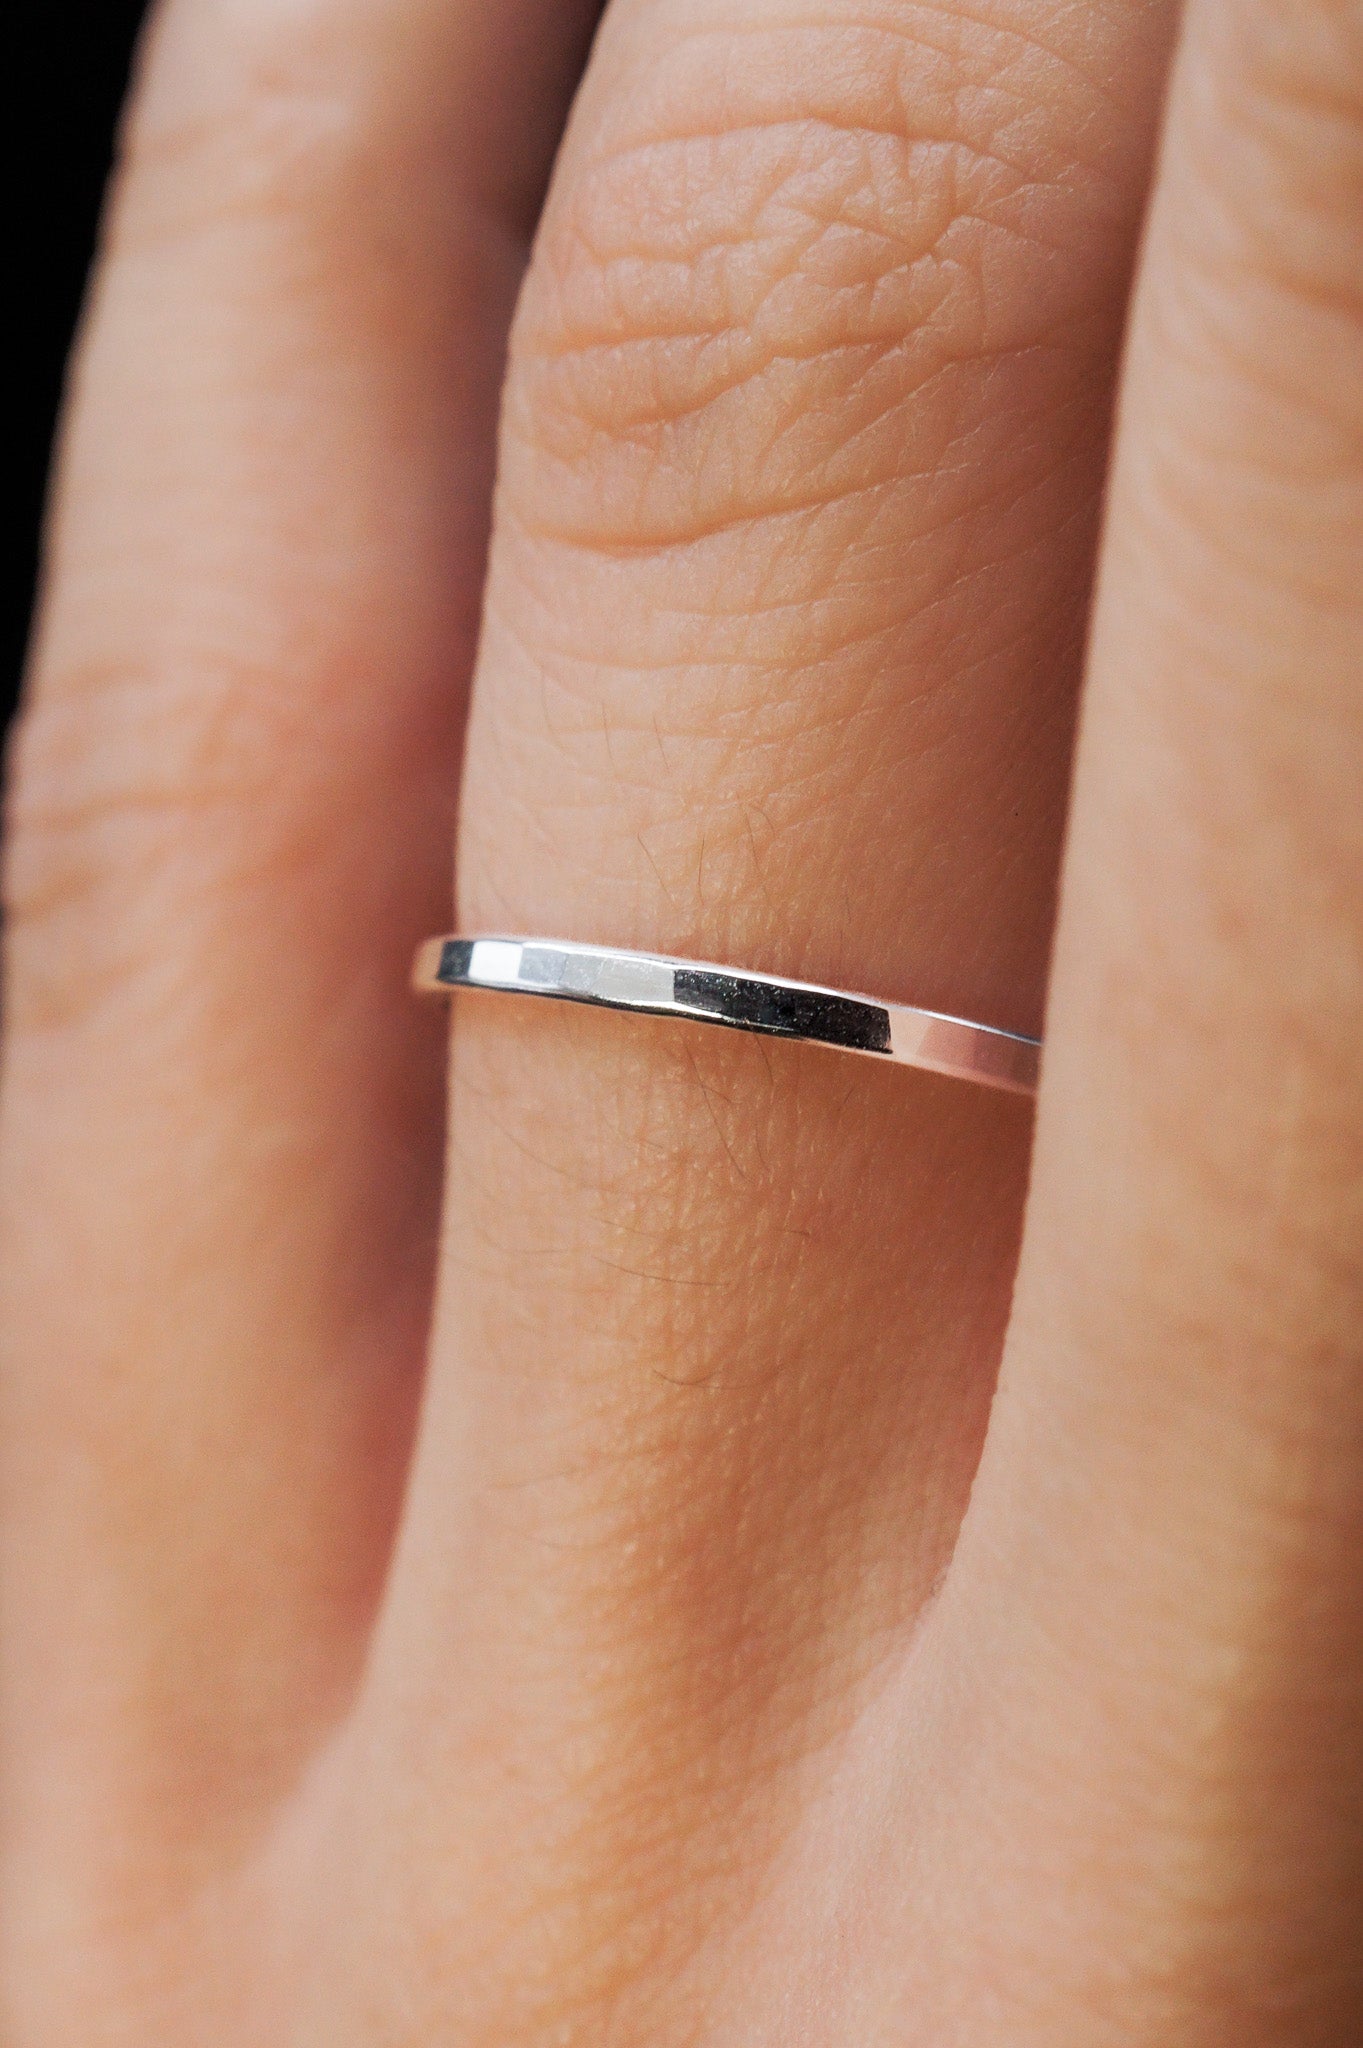 5mm Wide Flat Silver Ring Band, Sterling Silver, Simple Wedding Ring Band,  Plain Silver Band, Women's Men's Unisex Ring Band, Made to Order -   Canada